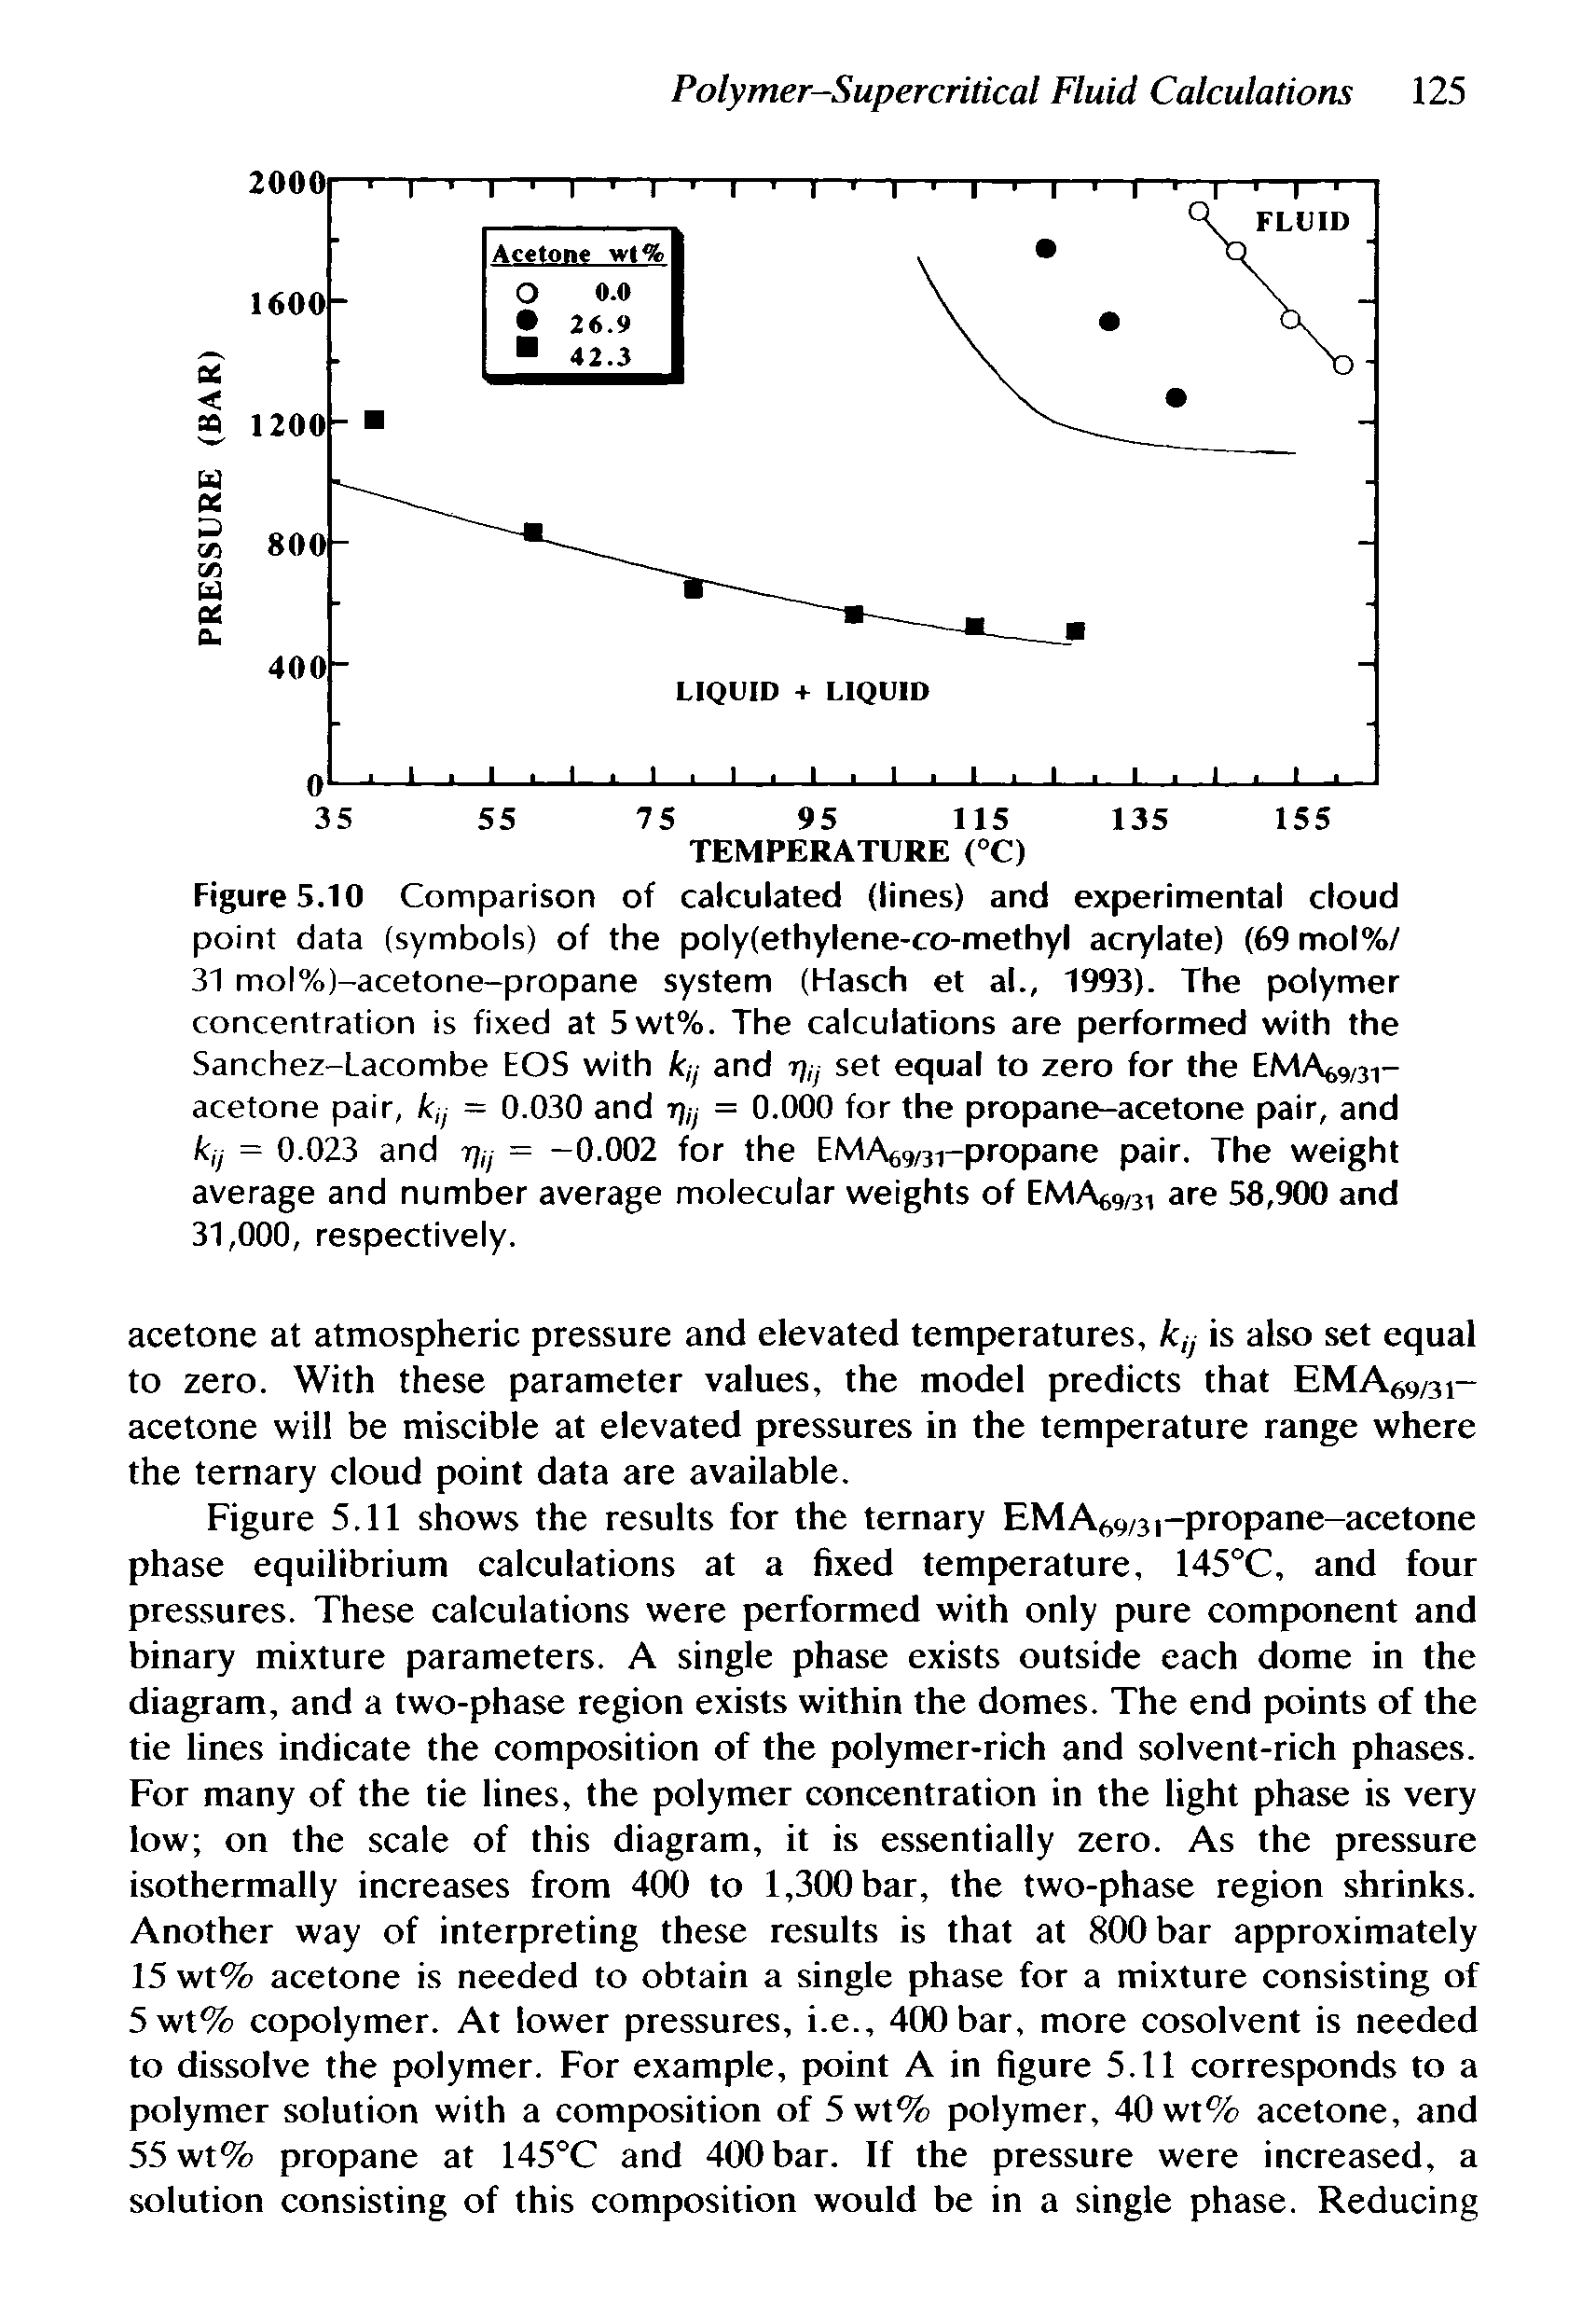 Figure 5.10 Comparison of calculated (lines) and experimental cloud point data (symbols) of the poly(ethylene-co-methyl acrylate) (69 mol%/ 31 mol%)-acetone-propane system (Hasch et al., 1993). The polymer concentration is fixed at 5wt%. The calculations are performed with the Sanchez-Lacombe EOS with kij and 17,y set equal to zero for the EMAt9/3i-acetone pair, kij = 0.030 and rj/y = 0.000 for the propane-acetone pair, and kij = 0.023 and 77,/ = -0.002 for the EMA soi-propane pair. The weight average and number average molecular weights of EMA69/31 are 58,900 and 31,000, respectively.